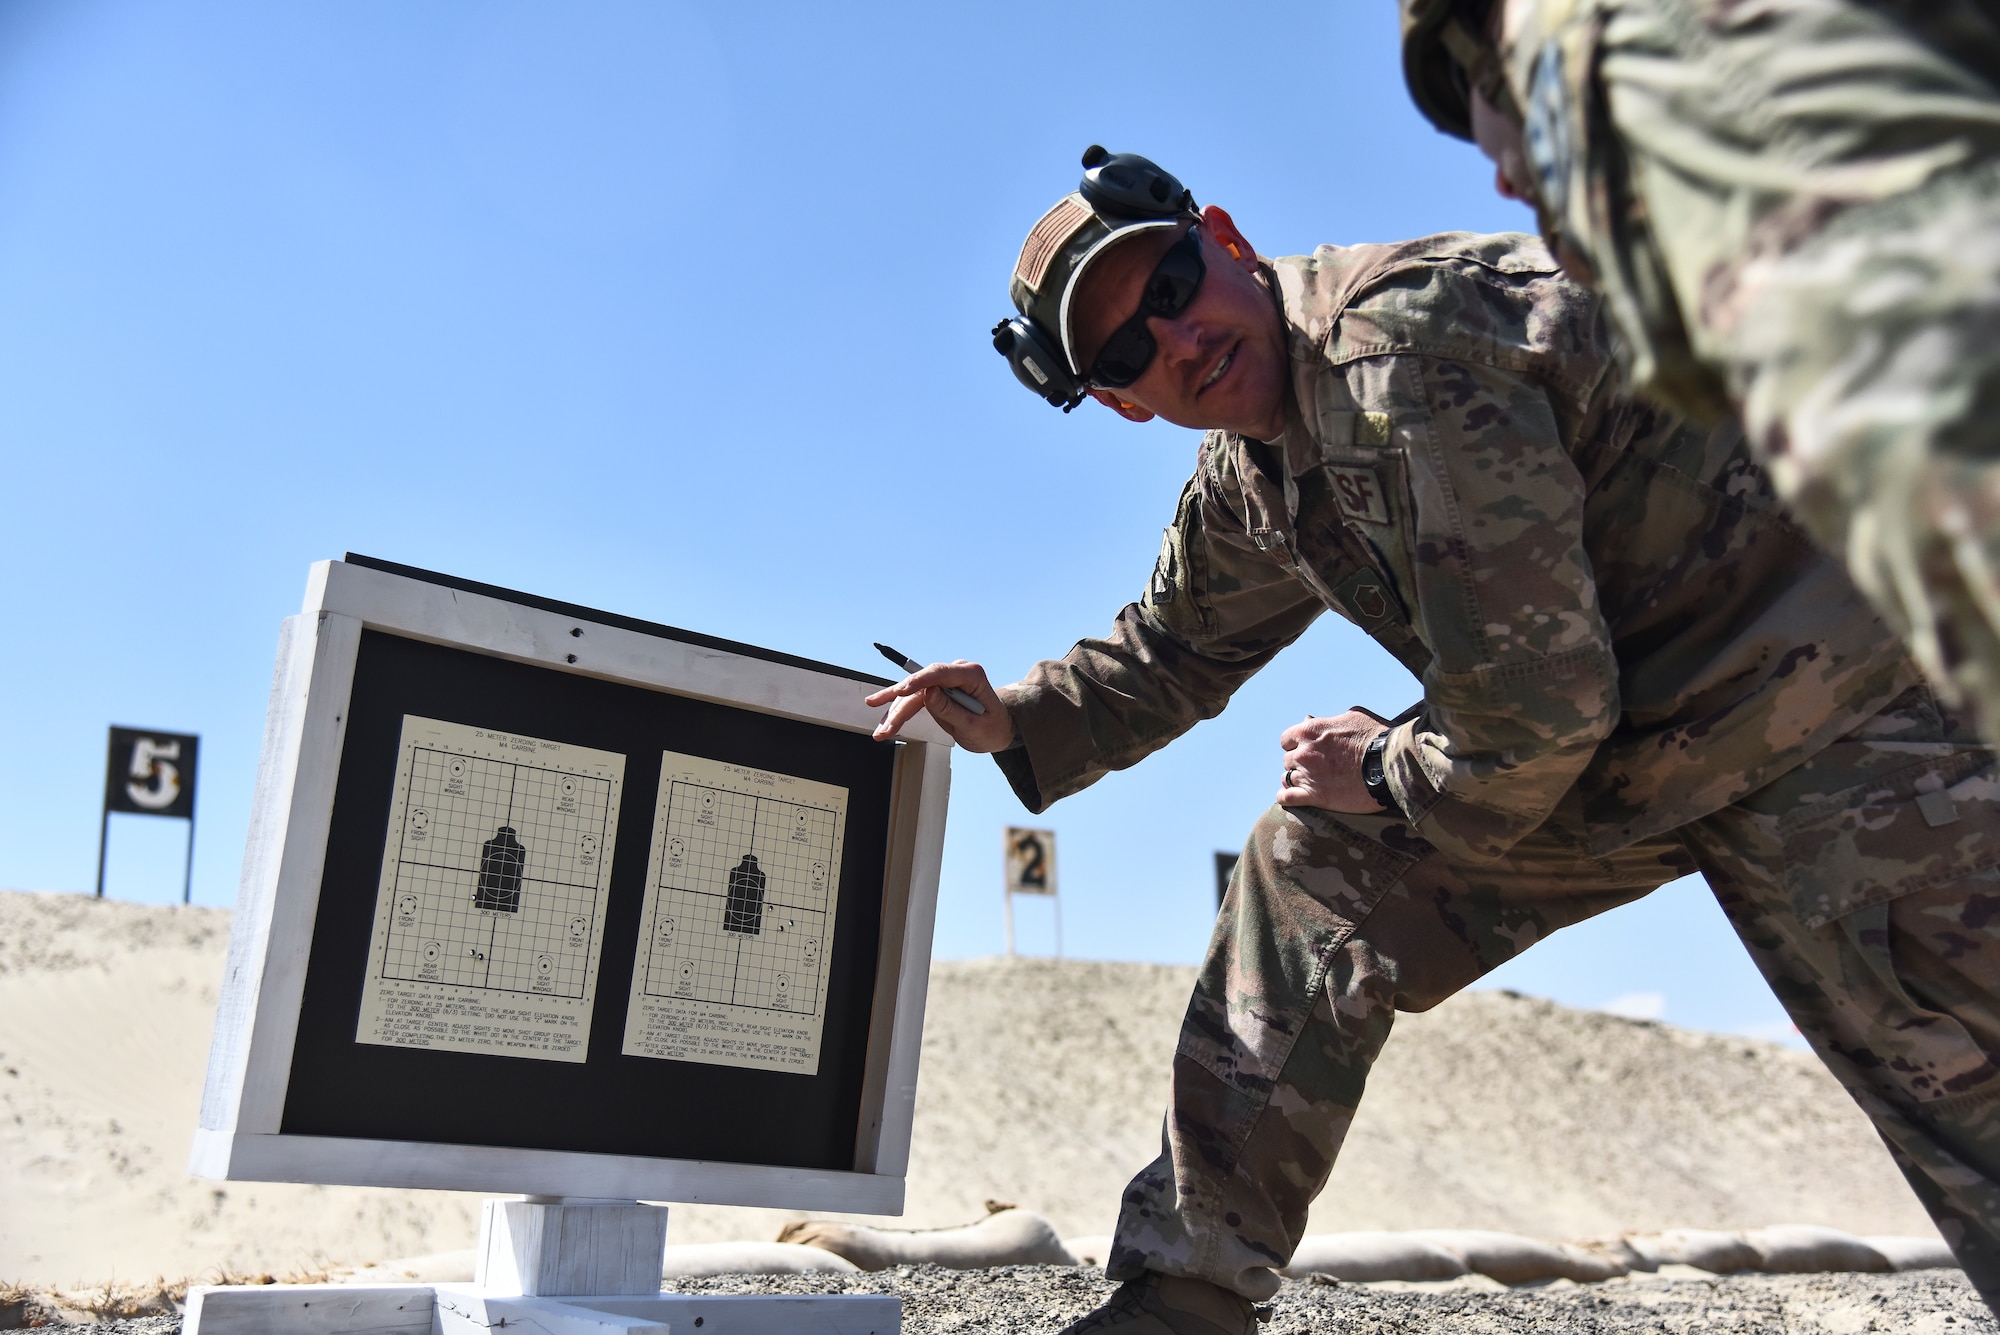 Master Sgt. Kurt Musson, 380th Expeditionary Security Forces Squadron NCO in charge of combat arms, provides sight corrections at Al Dhafra Air Base, United Arab Emirates, March 8, 2019. The 380th ESFS members used the method of “zeroing” their weapons – firing live rounds to ensure the accuracy as opposed to the method of bore sighting – a less reliable technique. (U.S. Air Force photo by Senior Airman Mya M. Crosby)